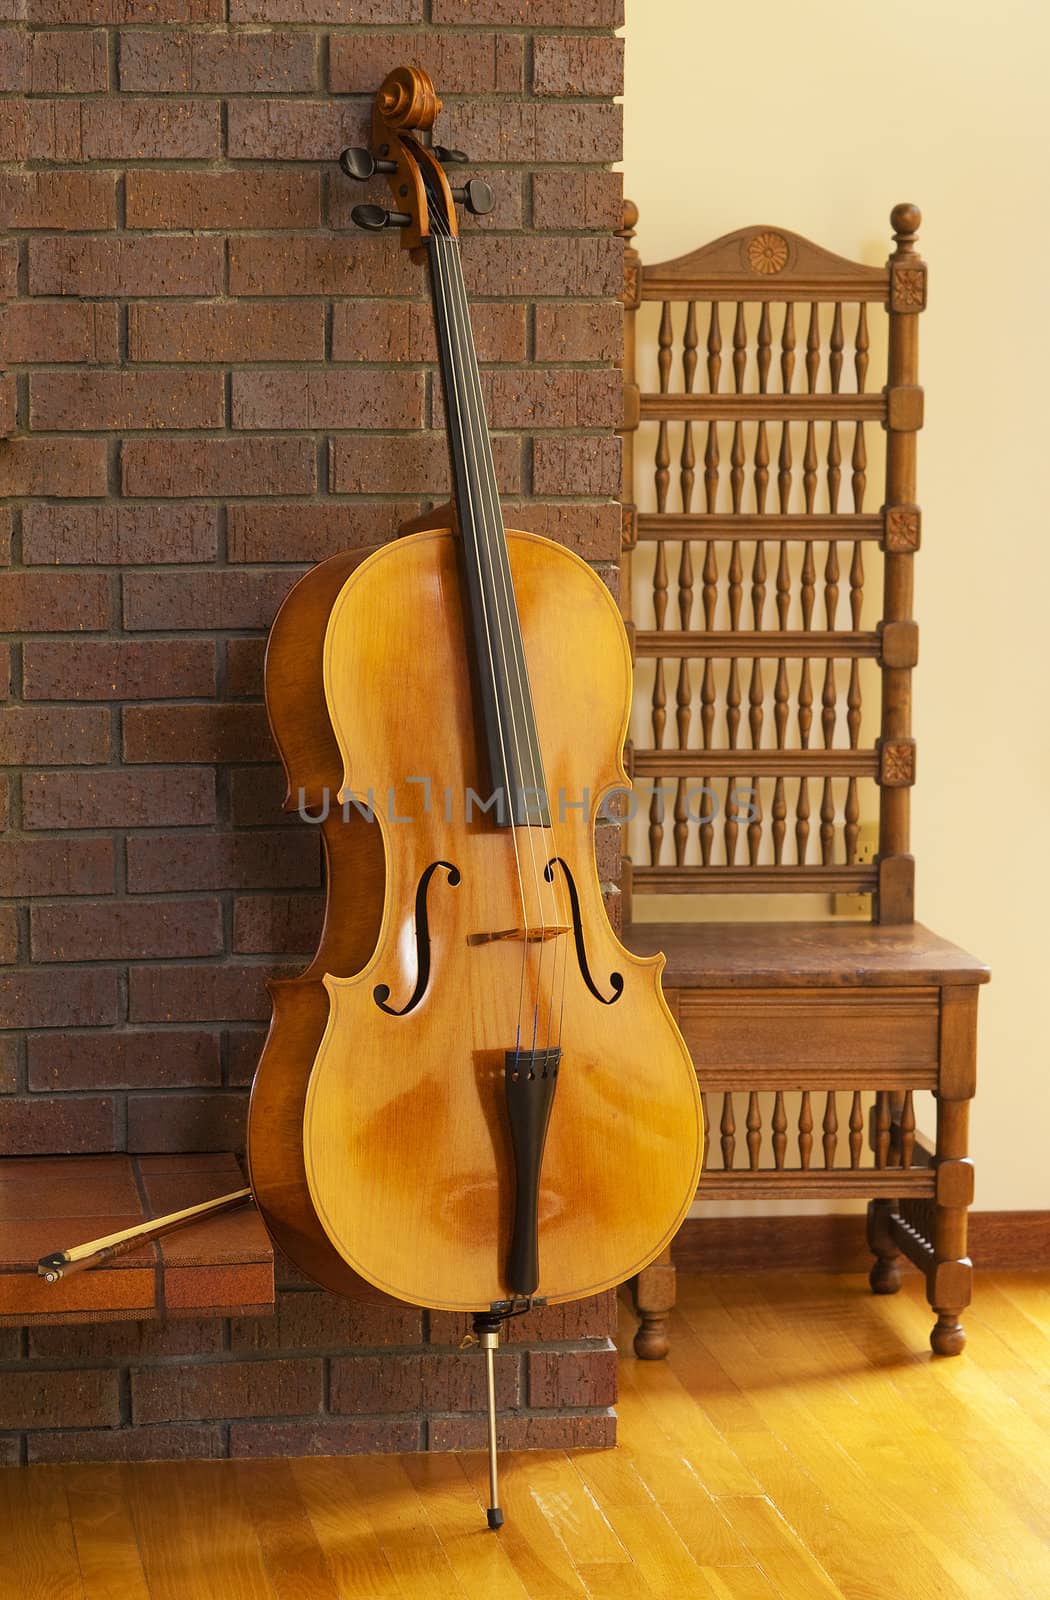 Cello or violoncello resting on fireplace